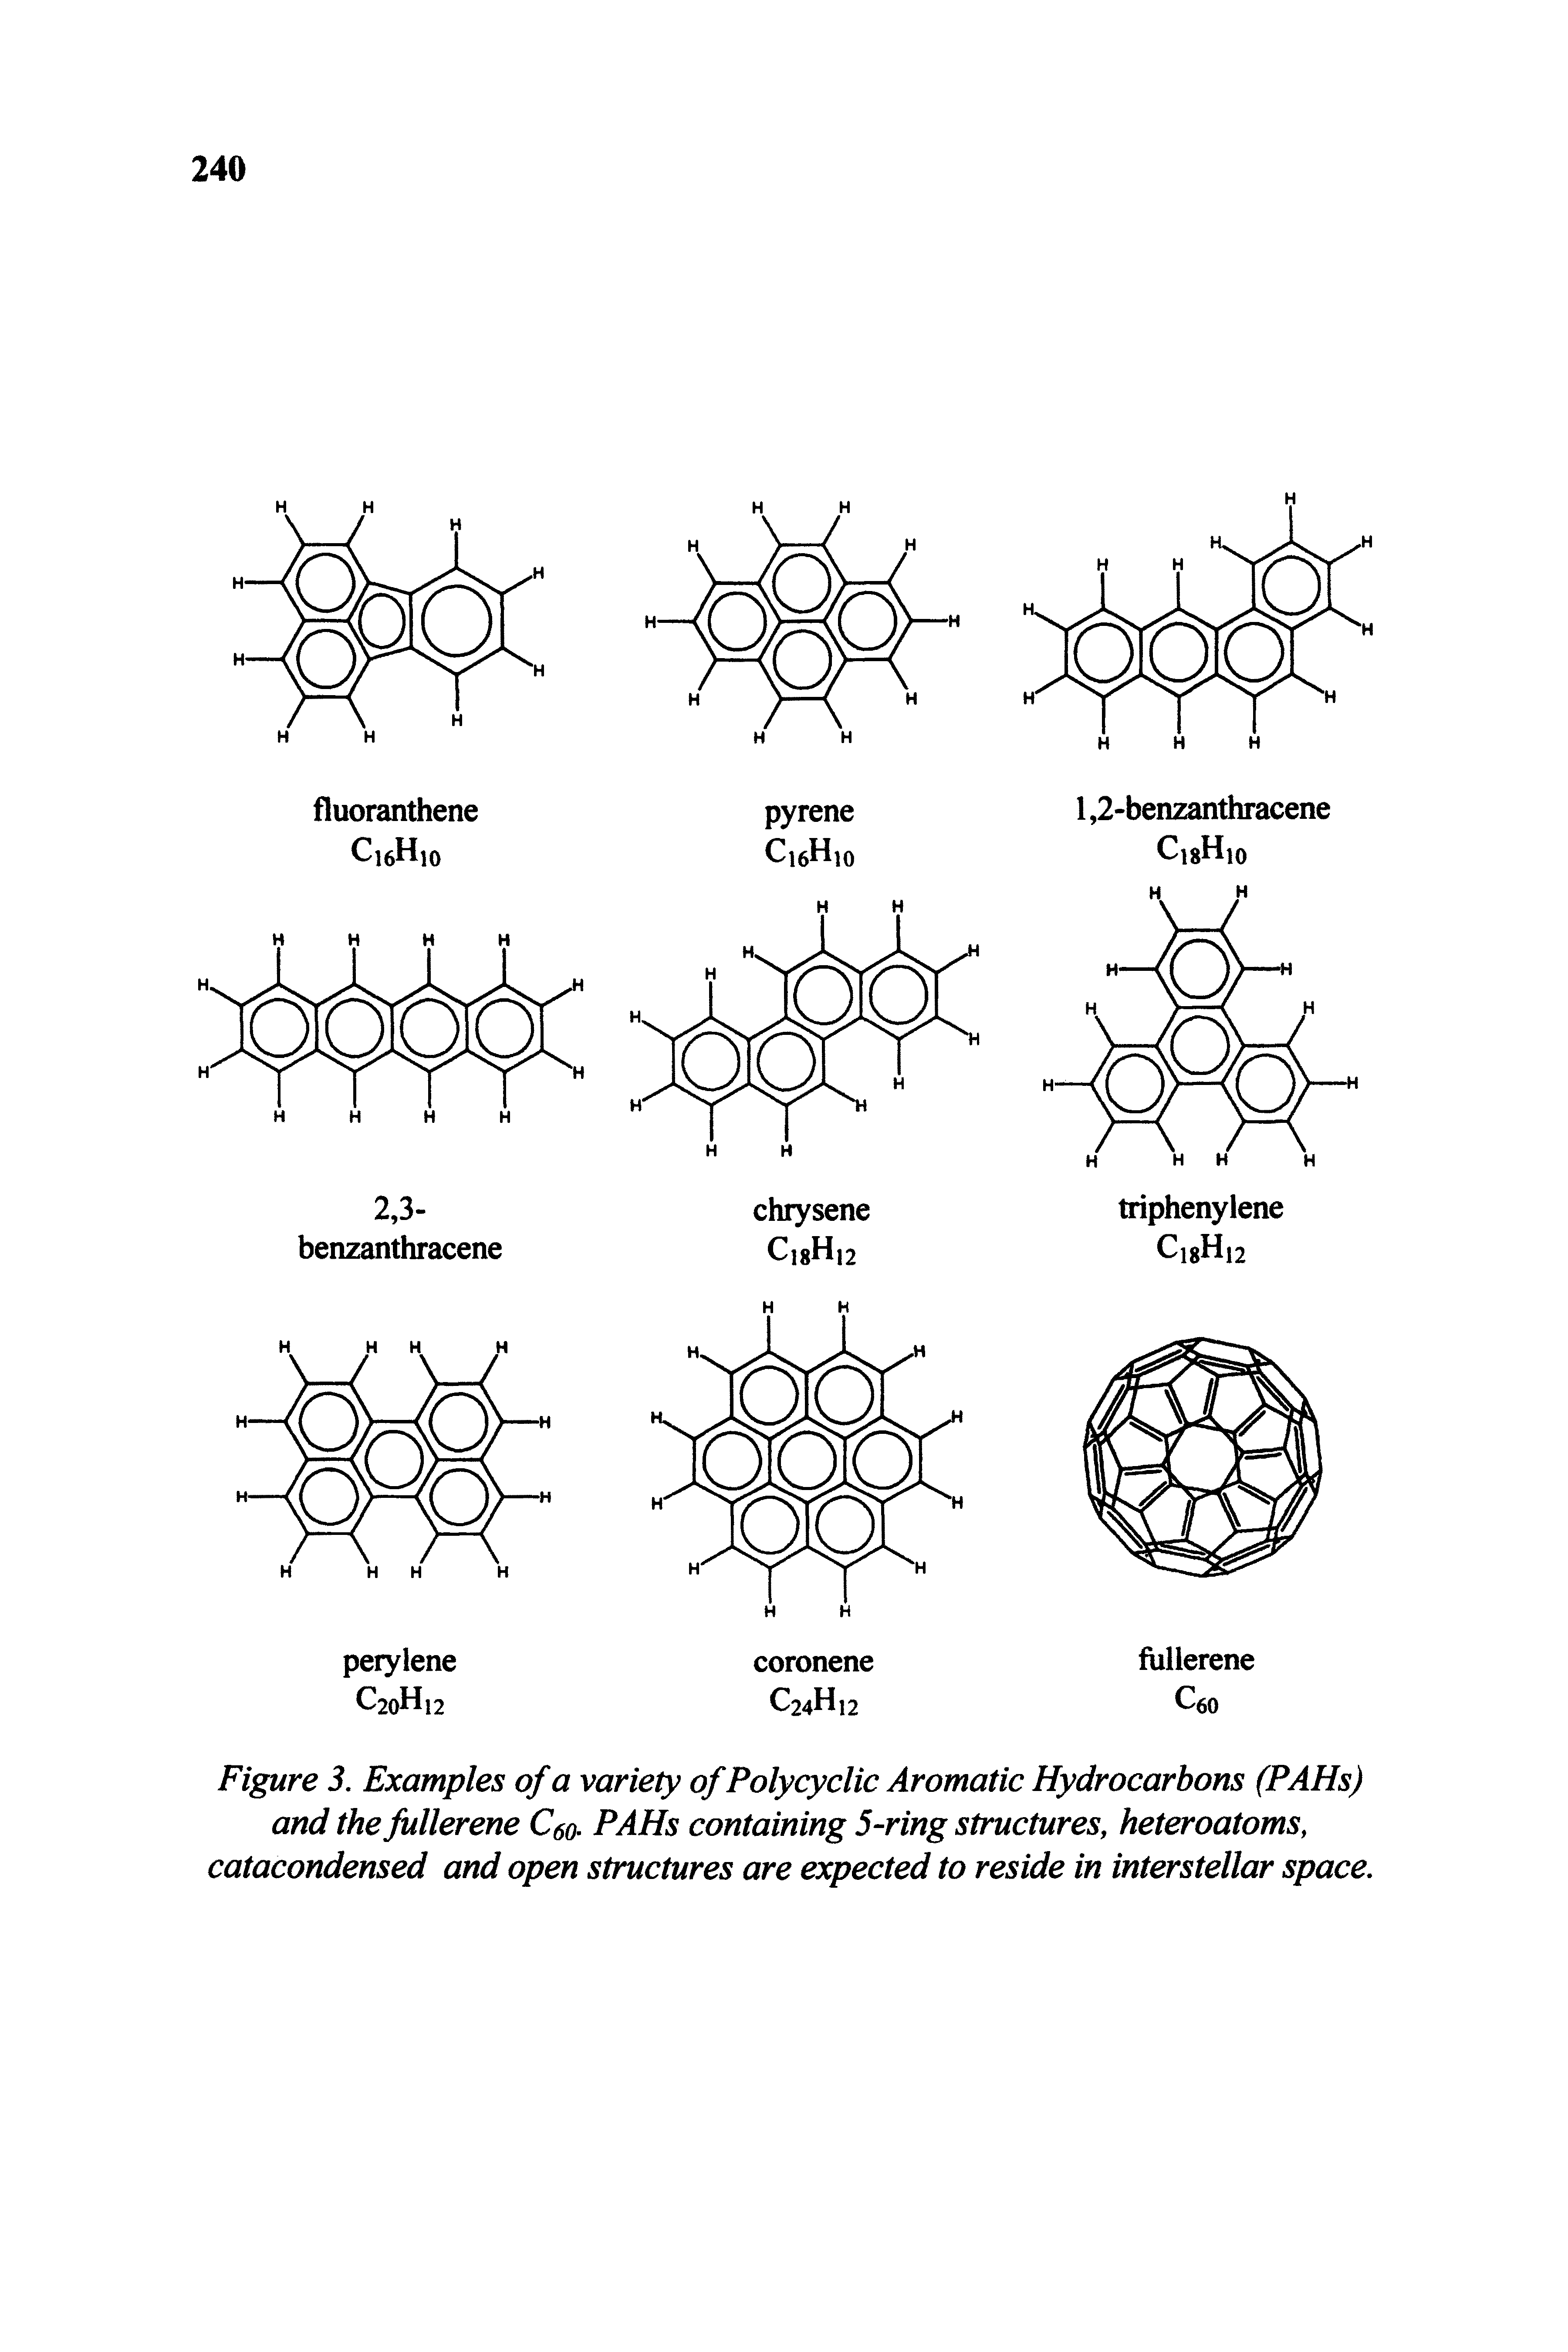 Figure 3. Examples of a variety ofPolycyclic Aromatic Hydrocarbons (PAHs) and the fullerene Cso- PAHs containing 5-ring structures, heteroatoms, catacondensed and open structures are expected to reside in interstellar space.